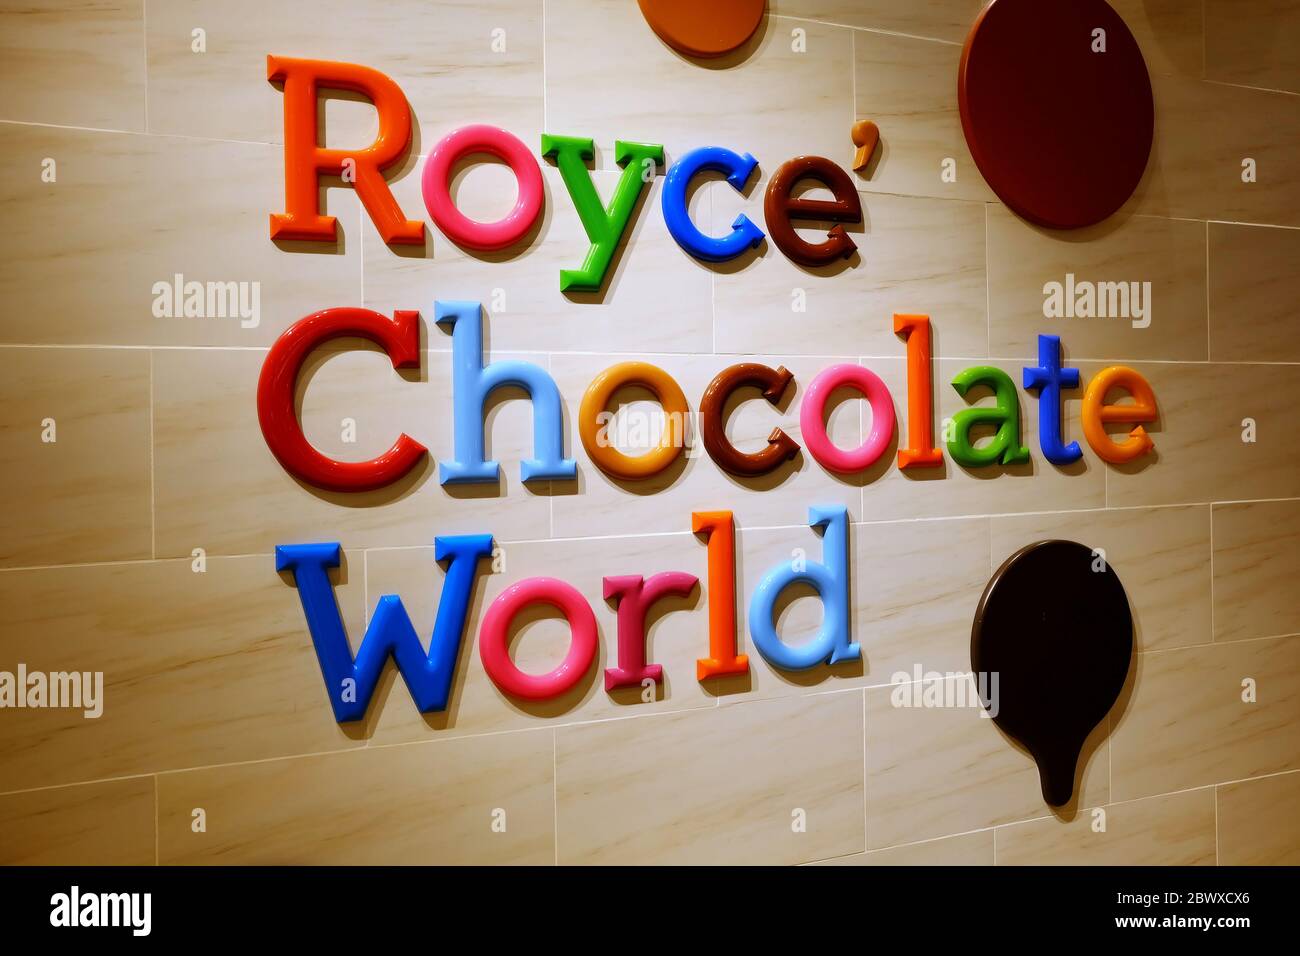 SAPPORO, JAPAN - NOVEMBER 16, 2019: Royce chocolate world Sign at in New Chitose Airport where is a famous tourist attraction in Sapporo, Japan. Stock Photo